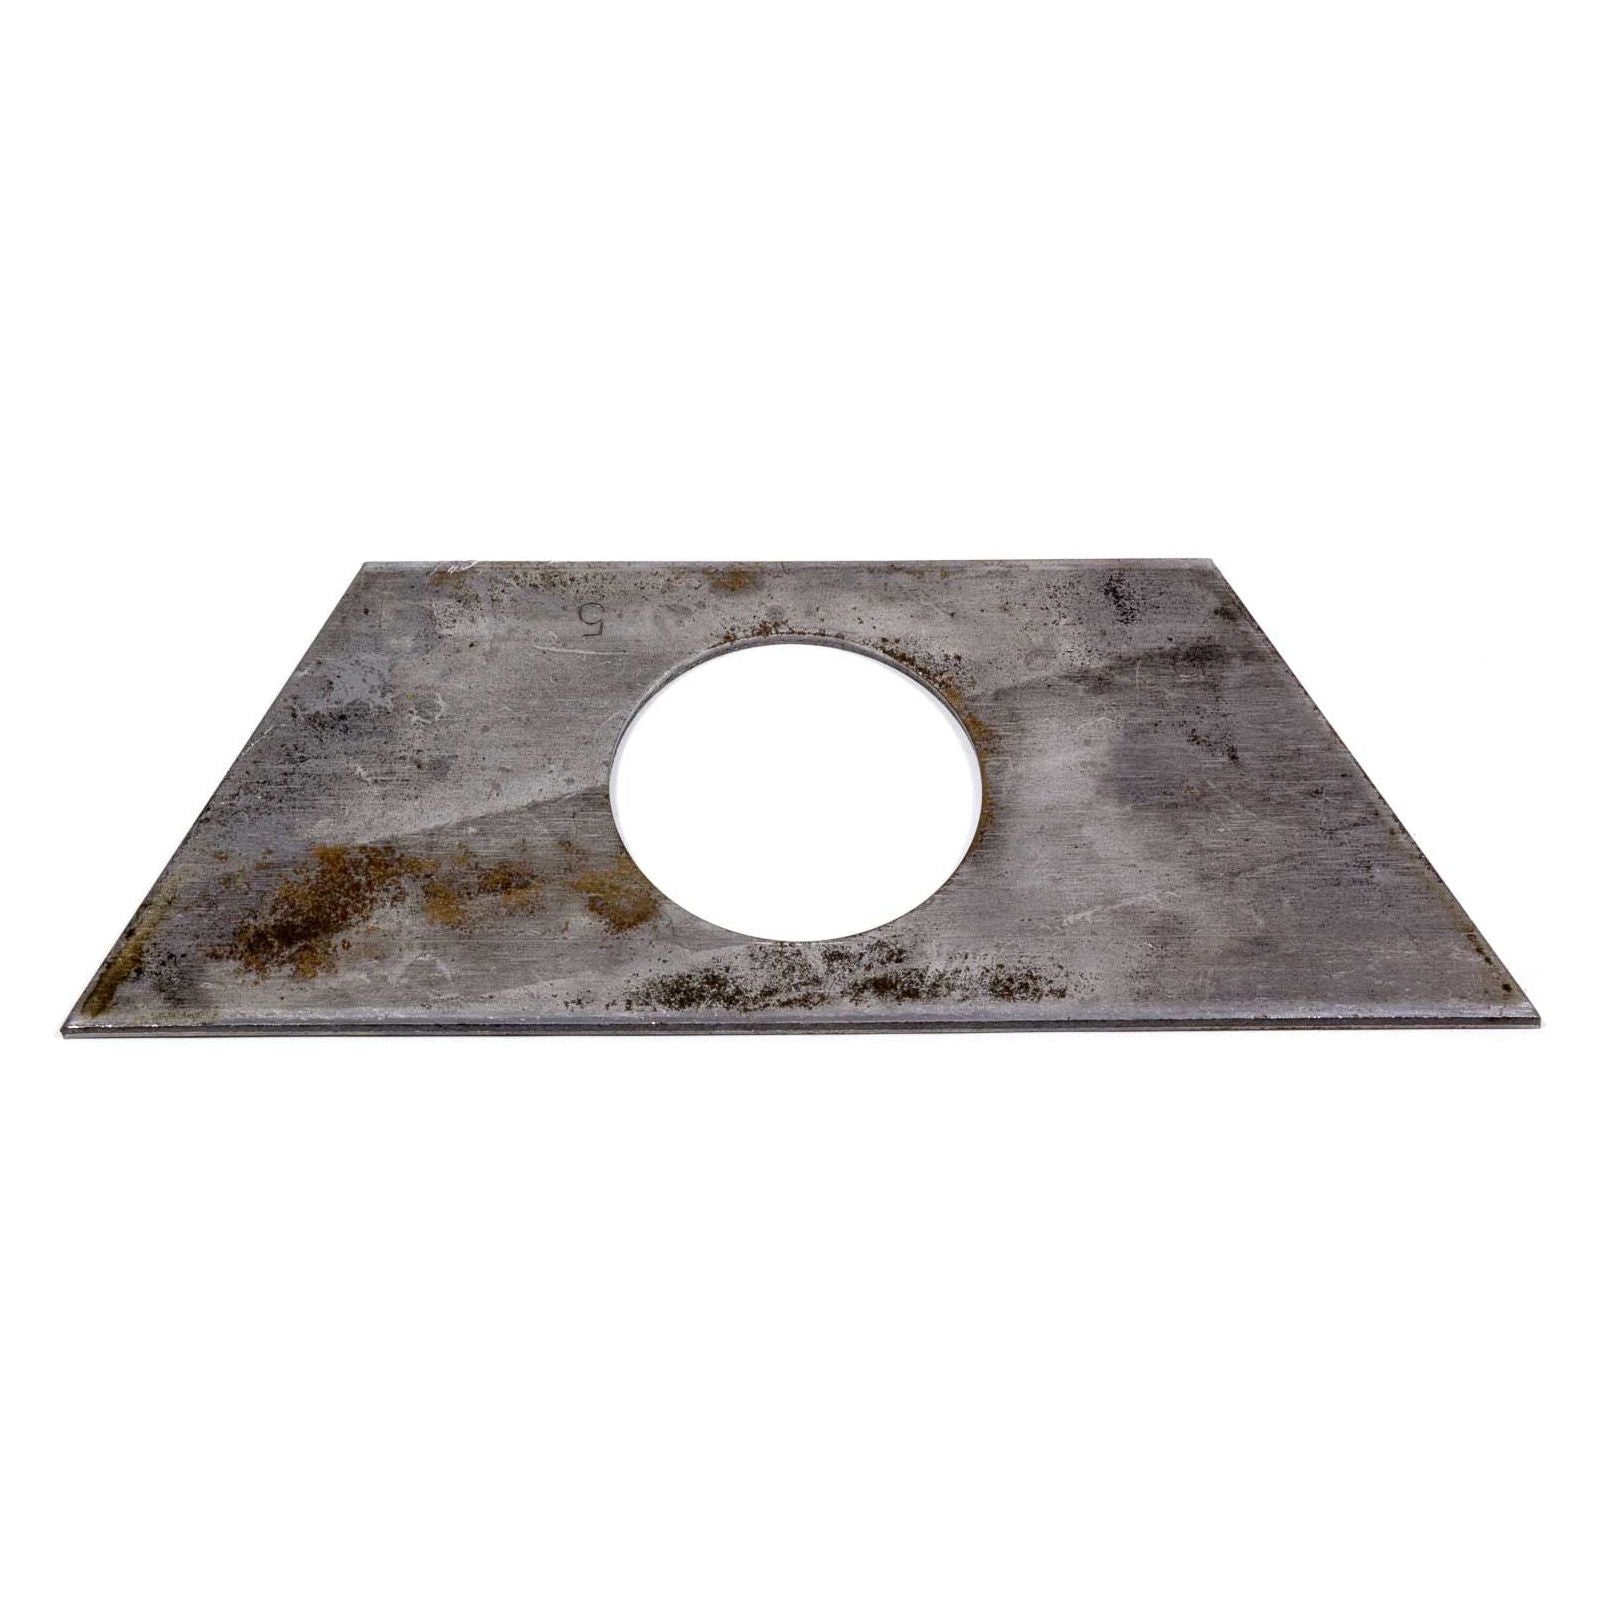 REESE SPB50 0300 - Bottom Support Plate W/ 2.29in Dia. Hole